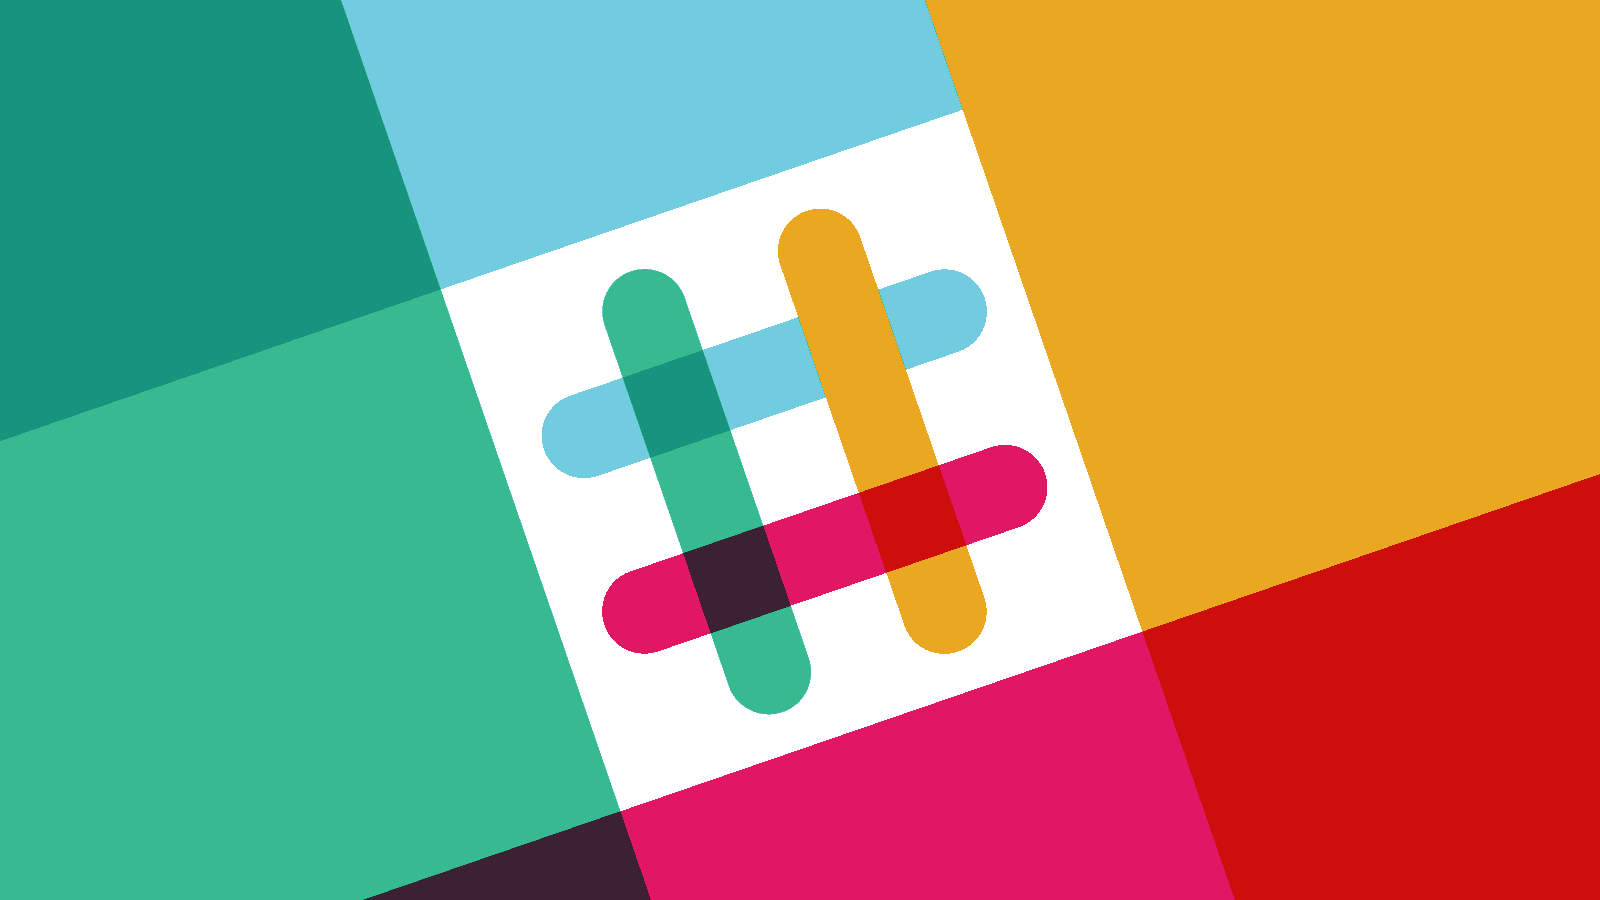 slack is one of the best instant messaging apps